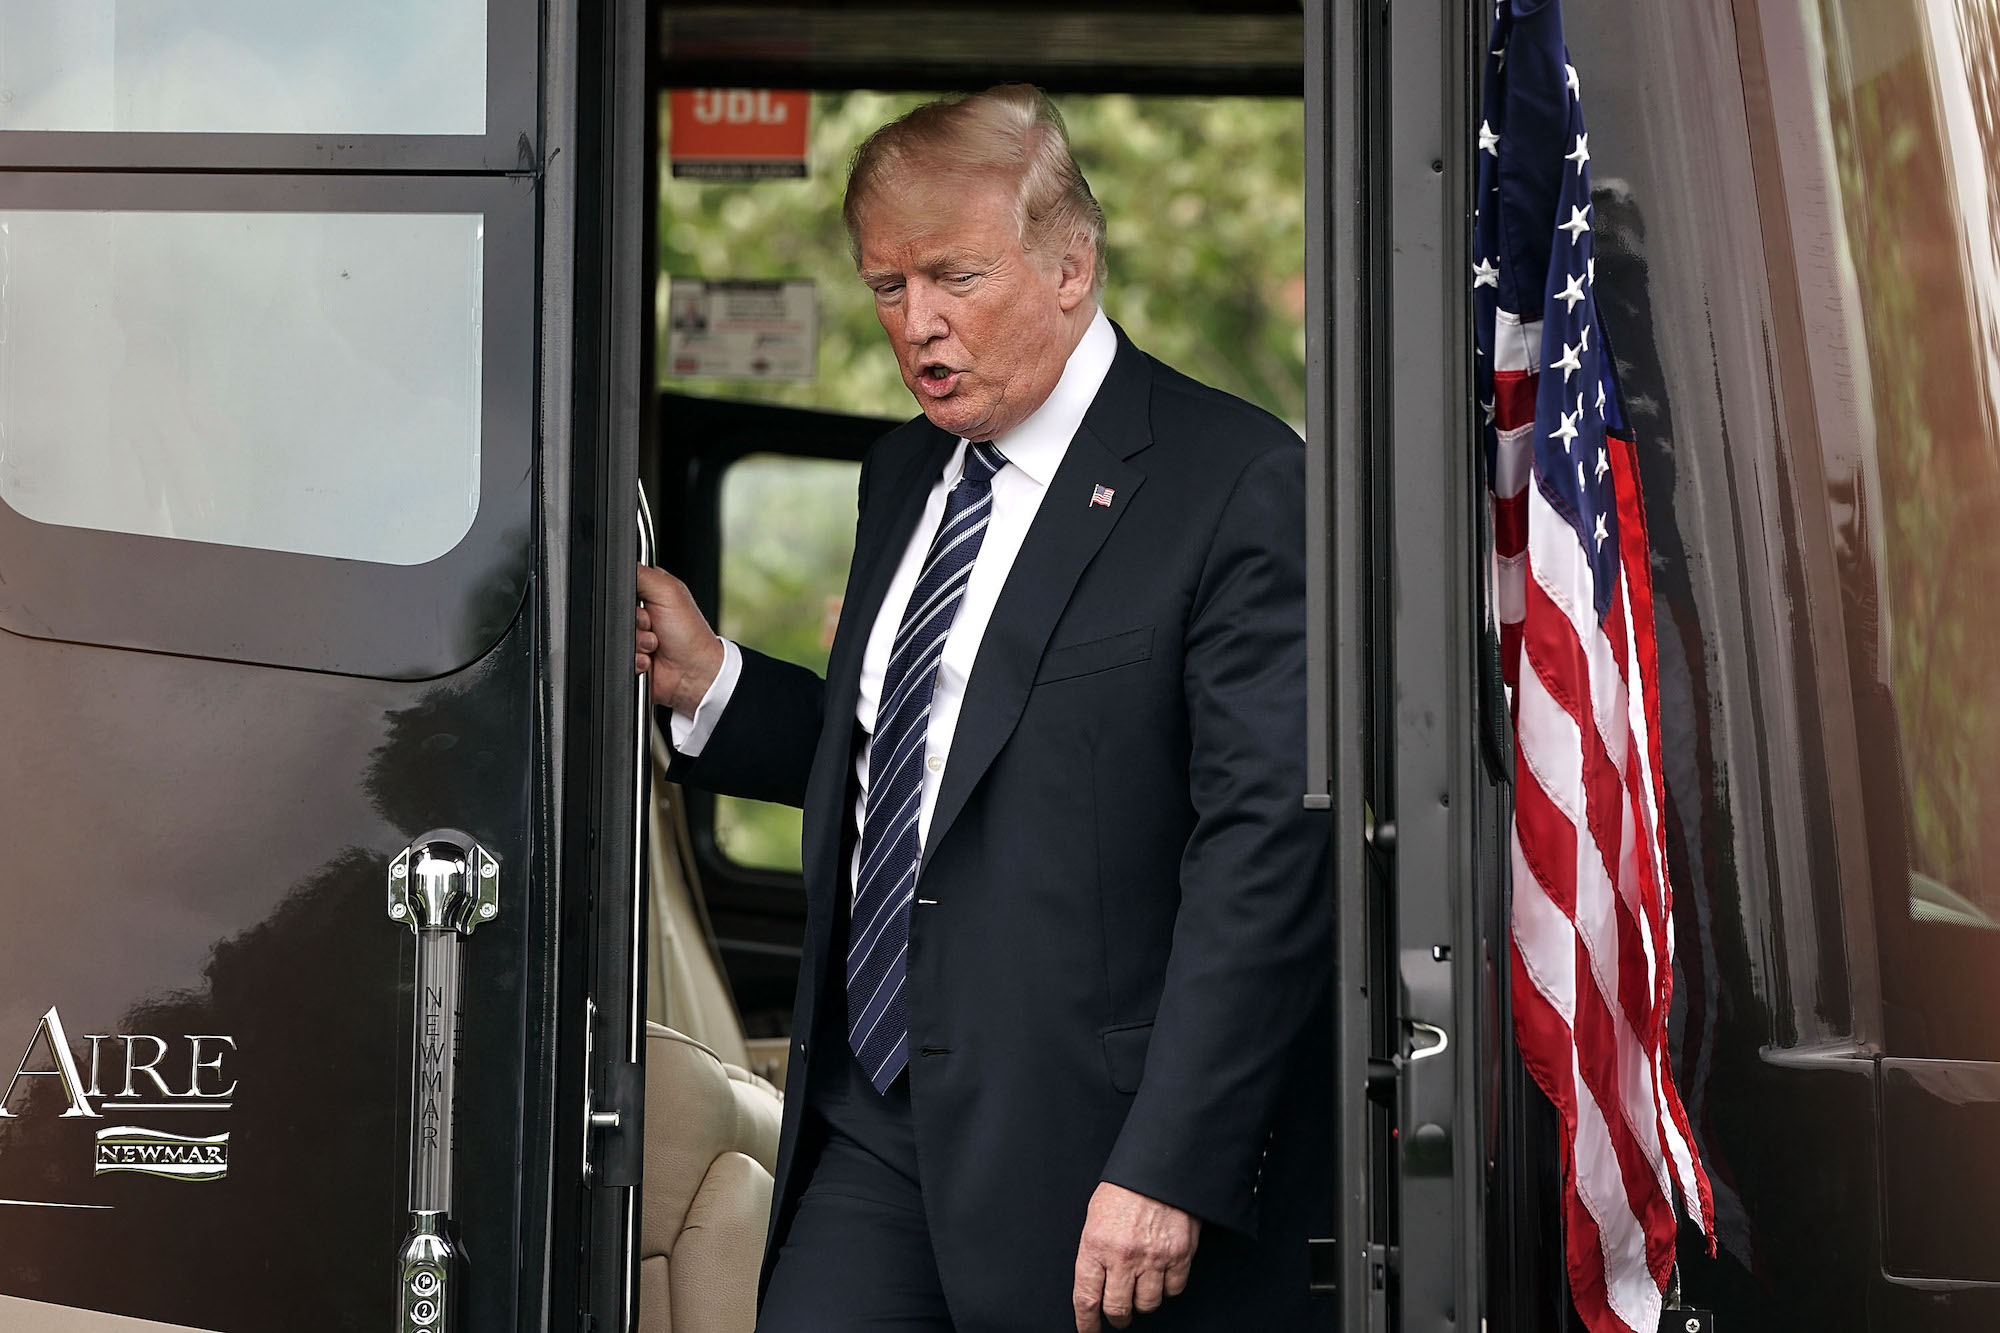 U.S. President Donald Trump tours an RV manufactured by Newmar Corp. during a "Made in America" products showcase on the South Lawn of the White House in Washington, D.C., on Monday, July 23, 2018